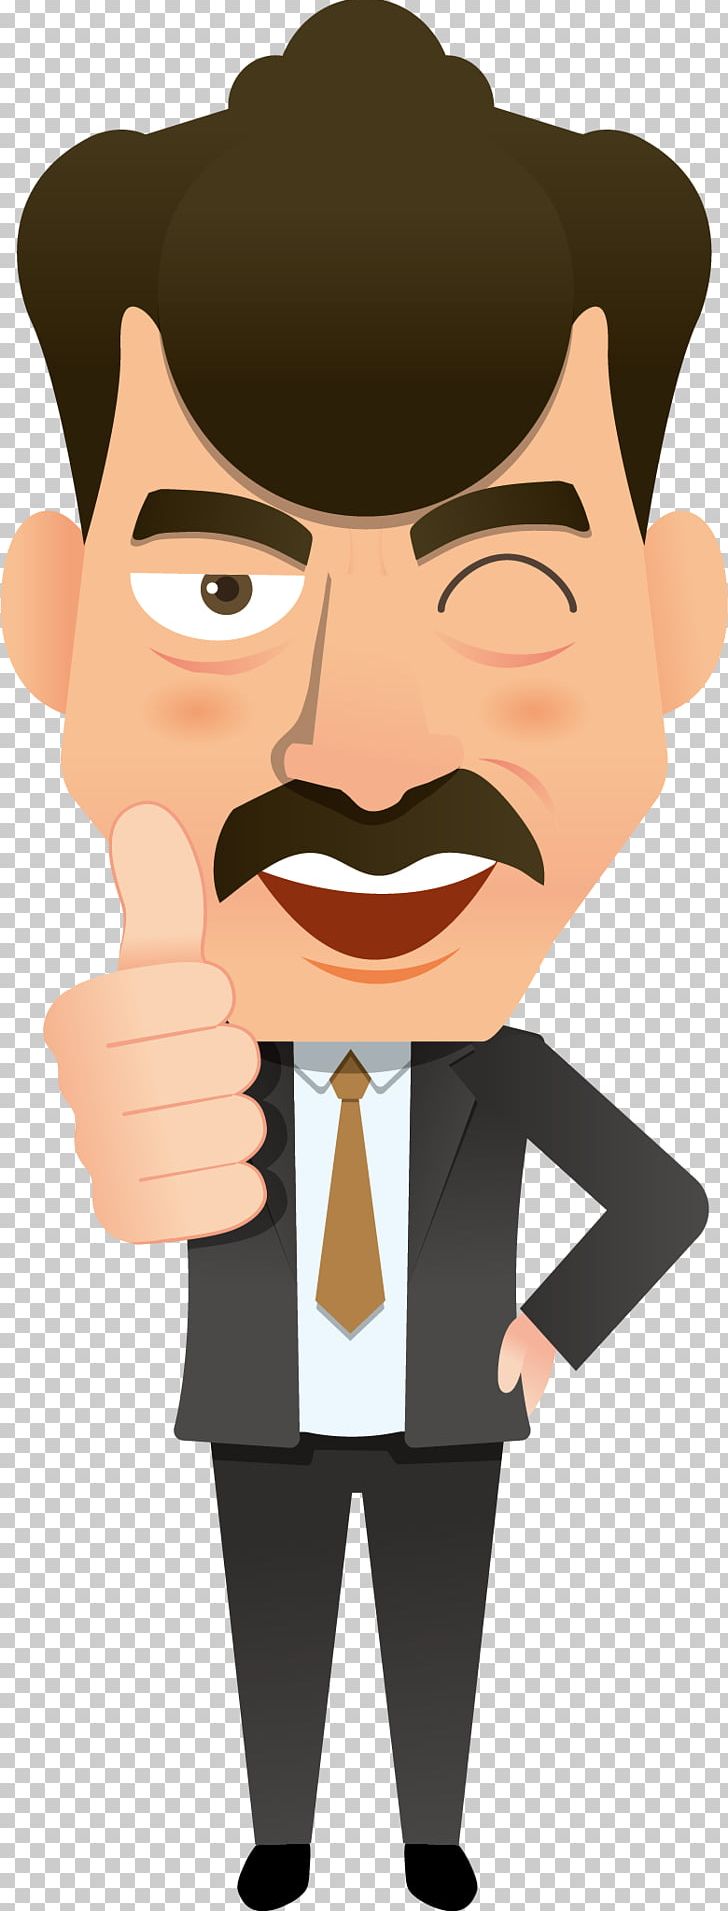 Businessperson Corporation Flat Design PNG, Clipart, Business, Business Man, Cartoon, Forehead, Hand Free PNG Download